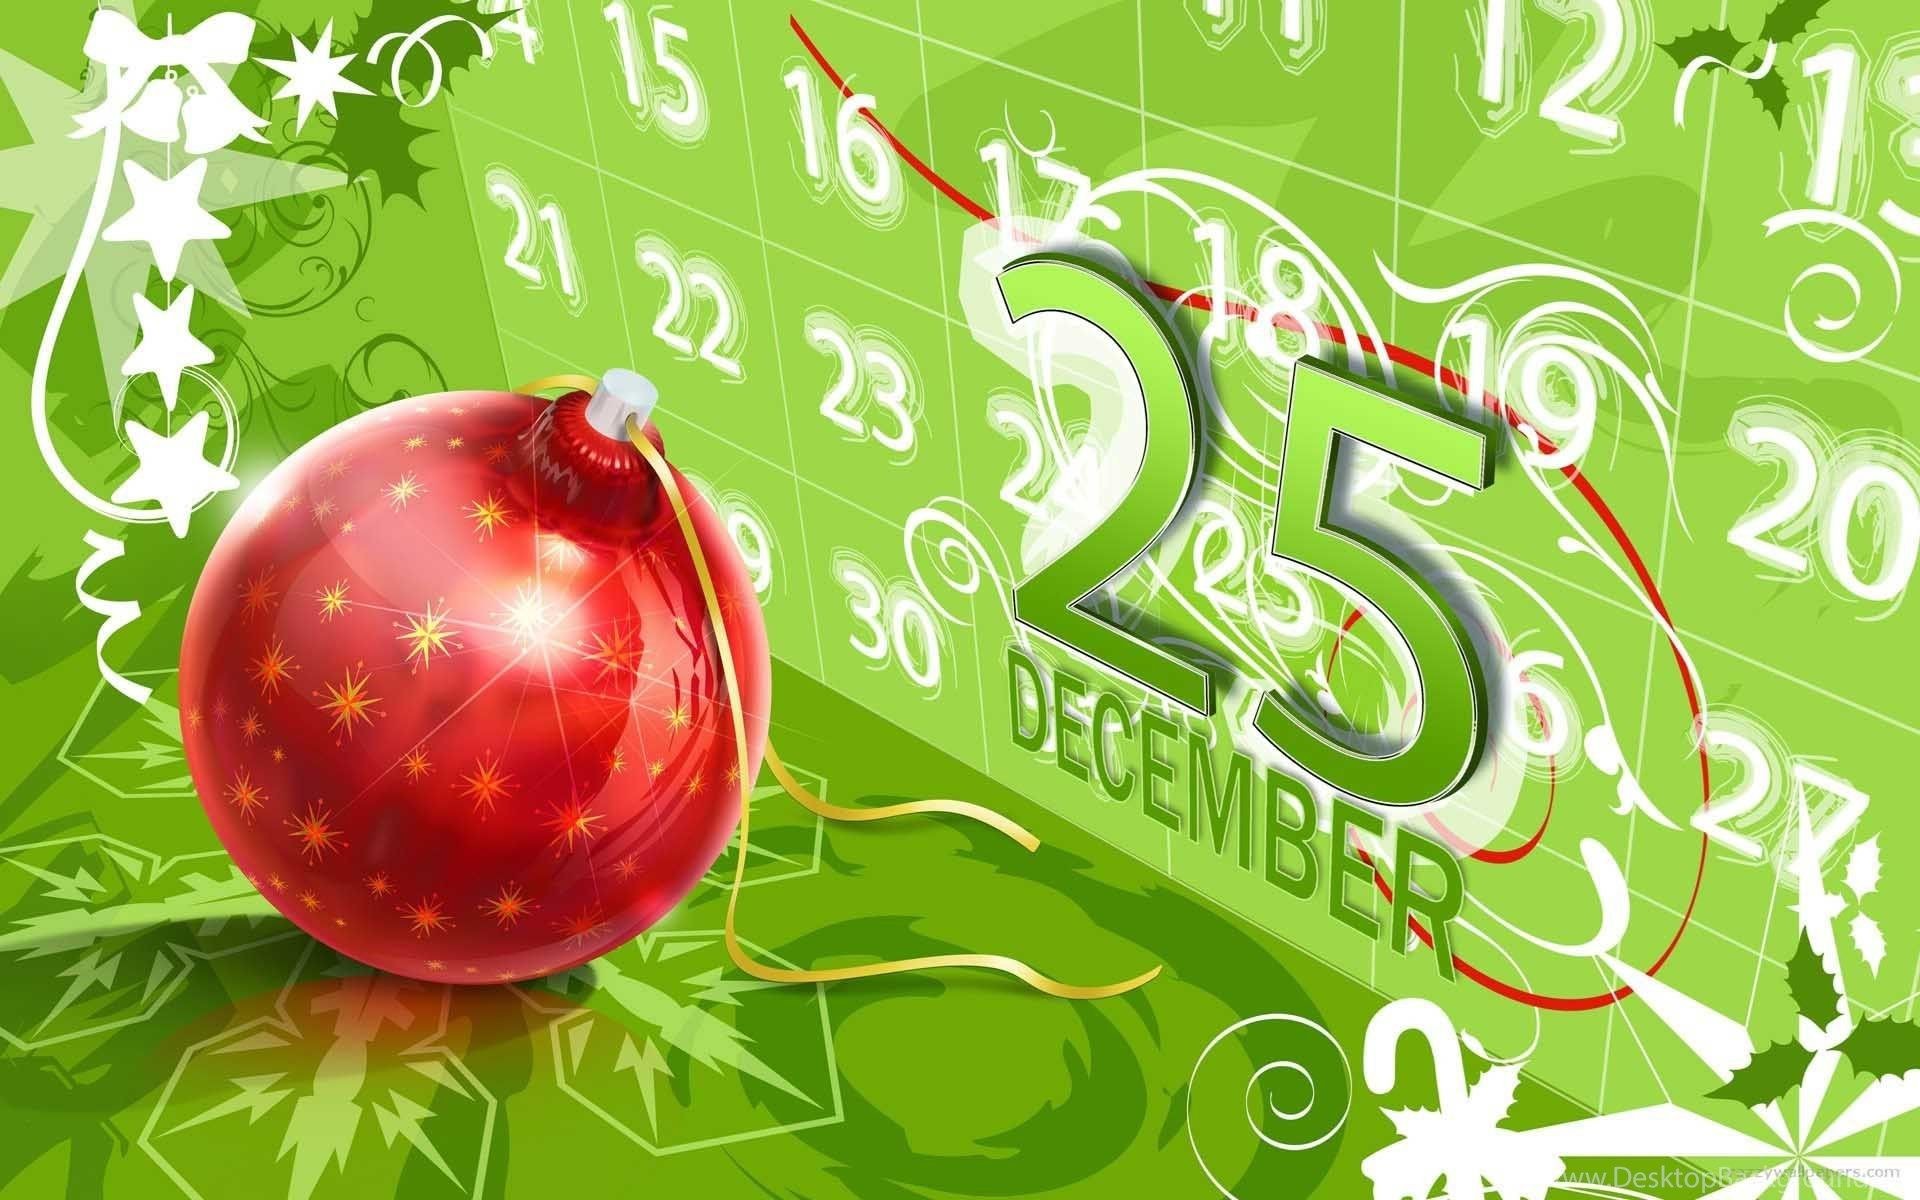 1920x1200 Christmas Countdown Wallpapers Started For 2015 In HD Desktop Background